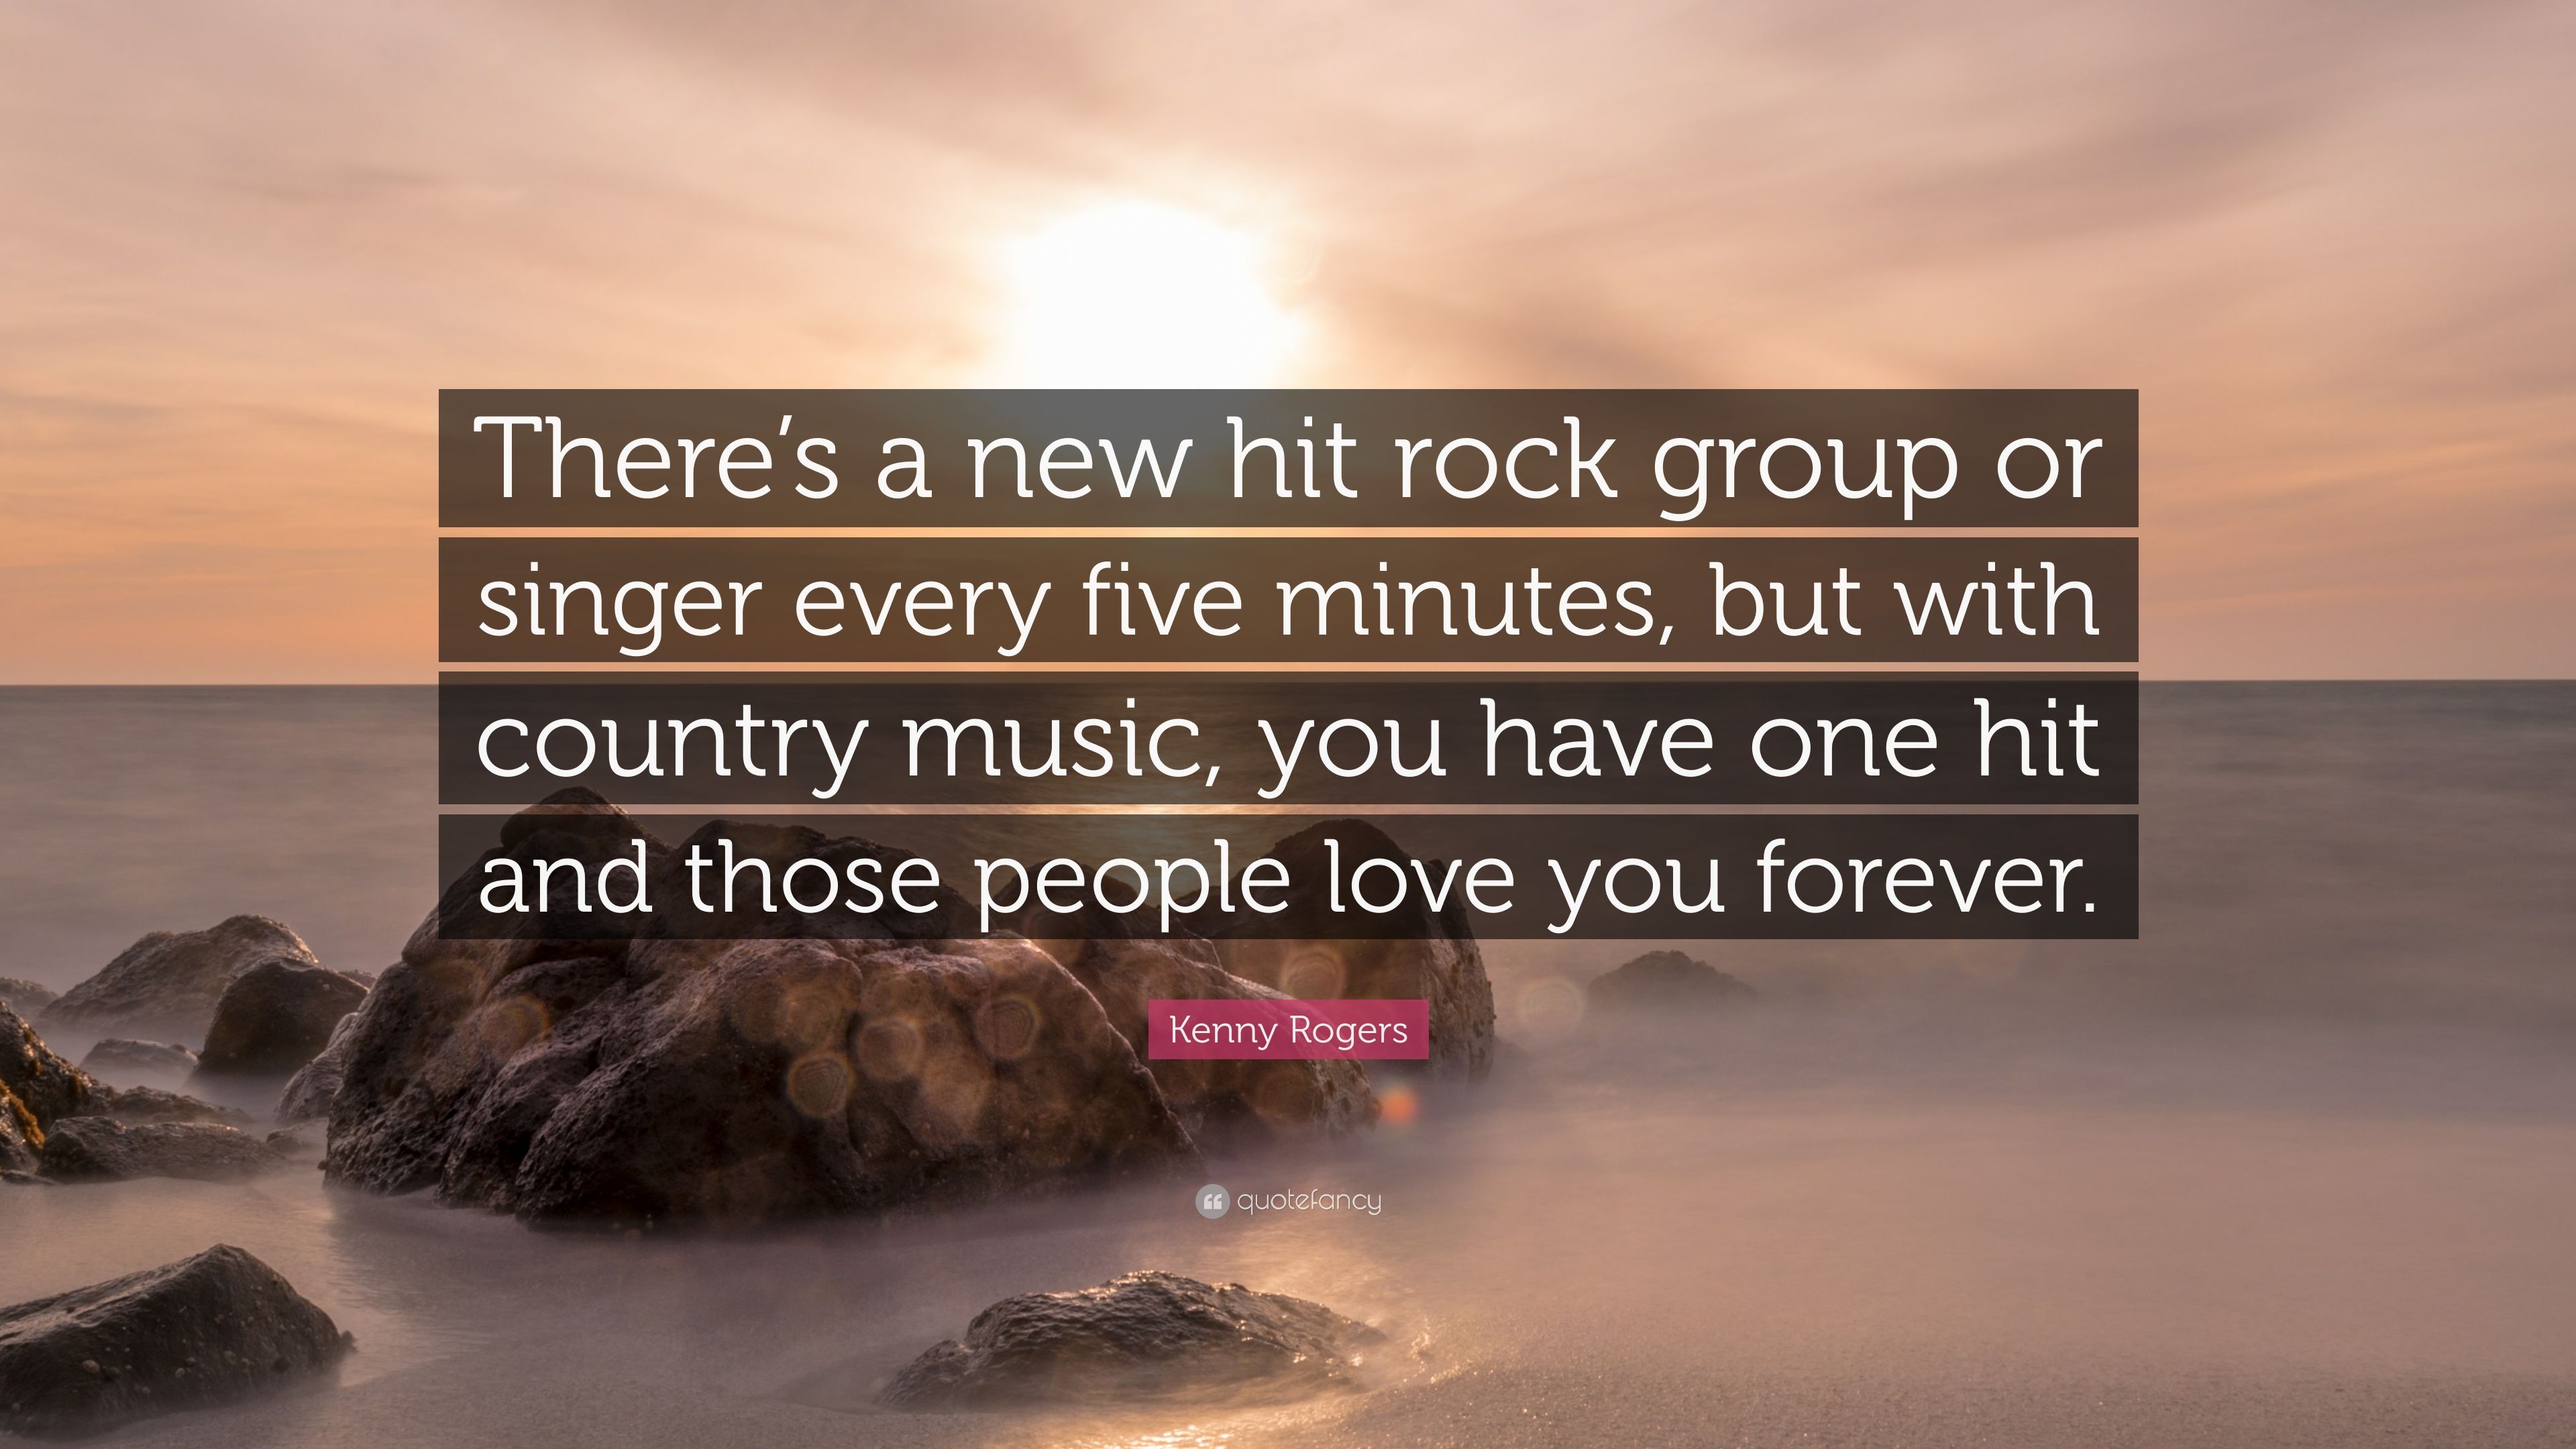 Kenny Rogers Quote: “There's a new hit rock group or singer every five minutes, but with country music, you have one hit and those people lov.”